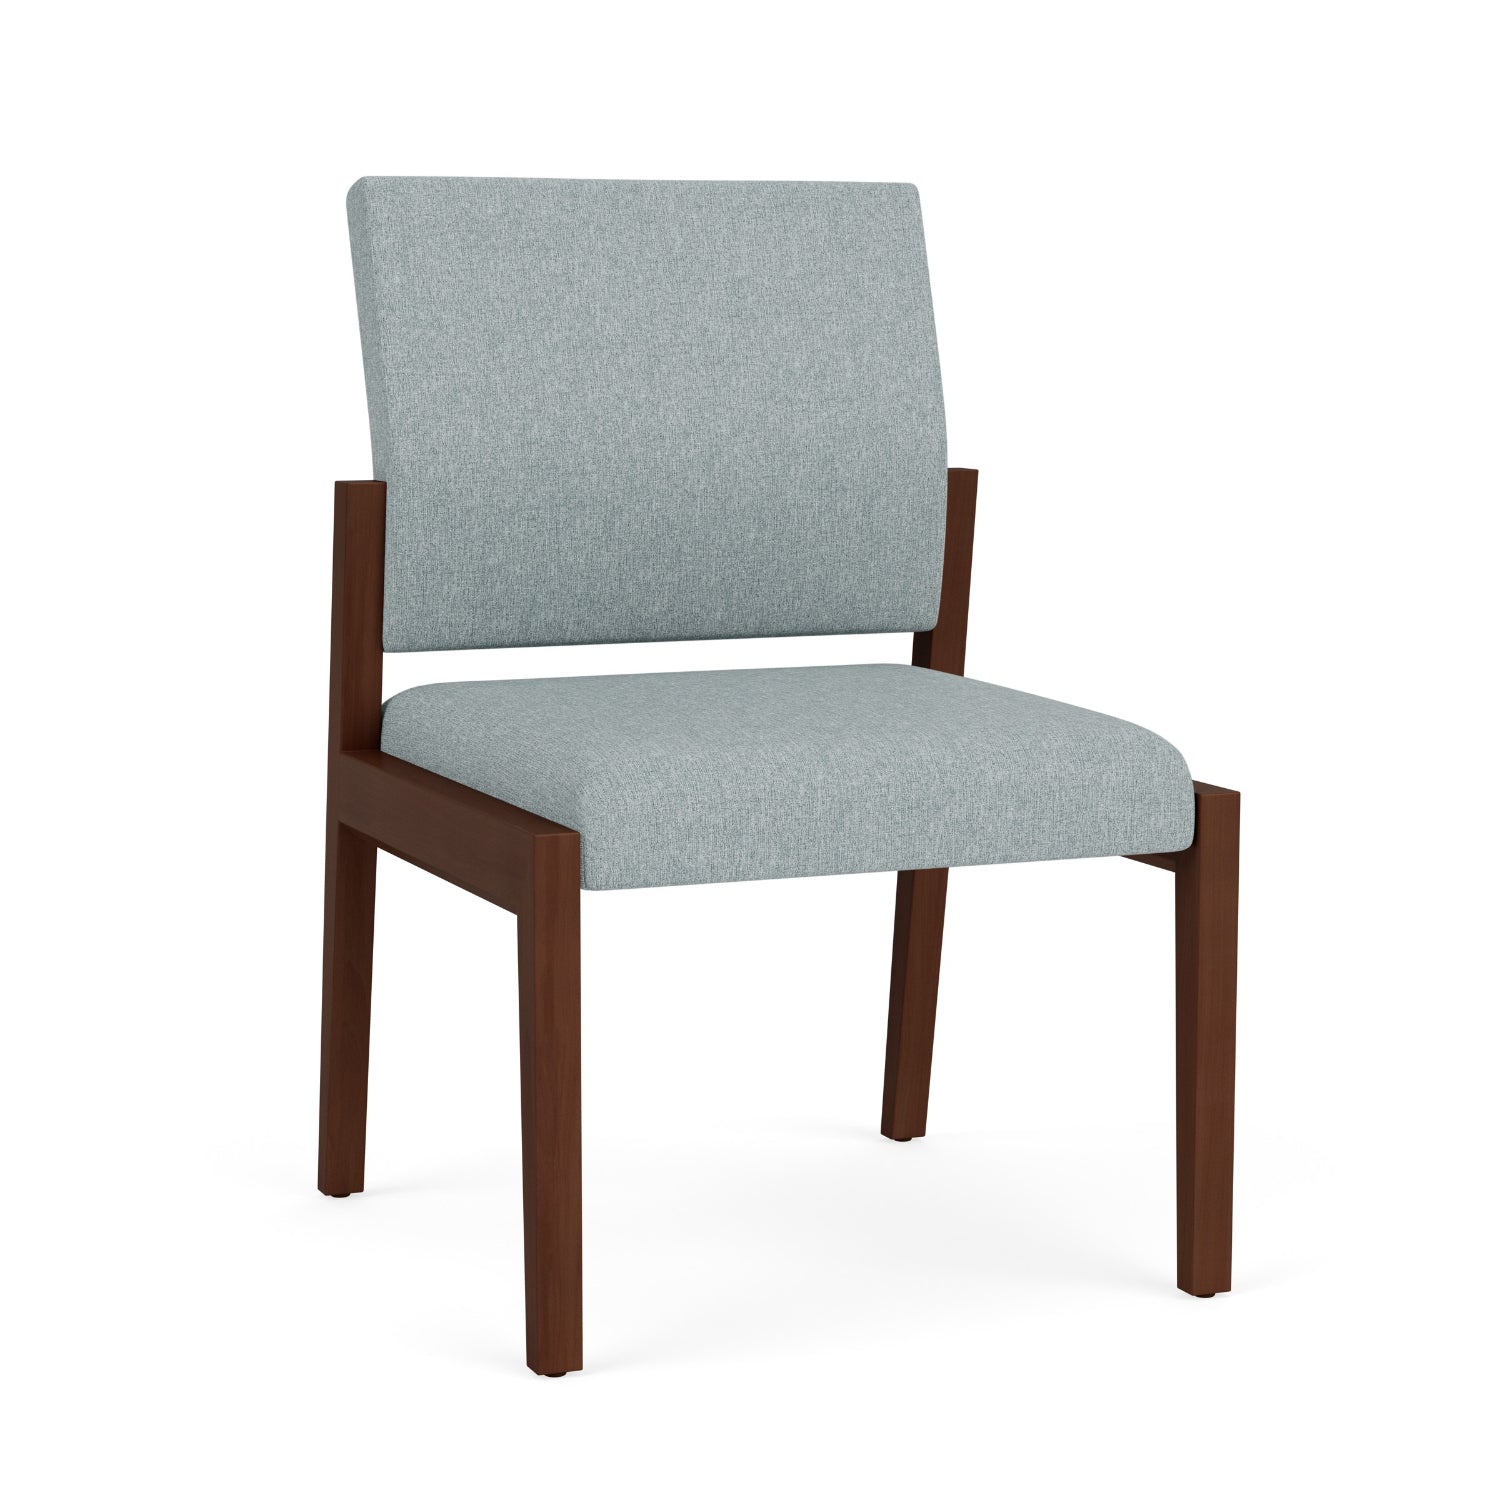 Brooklyn Collection Reception Seating, Armless Guest Chair, Healthcare Vinyl Upholstery, FREE SHIPPING